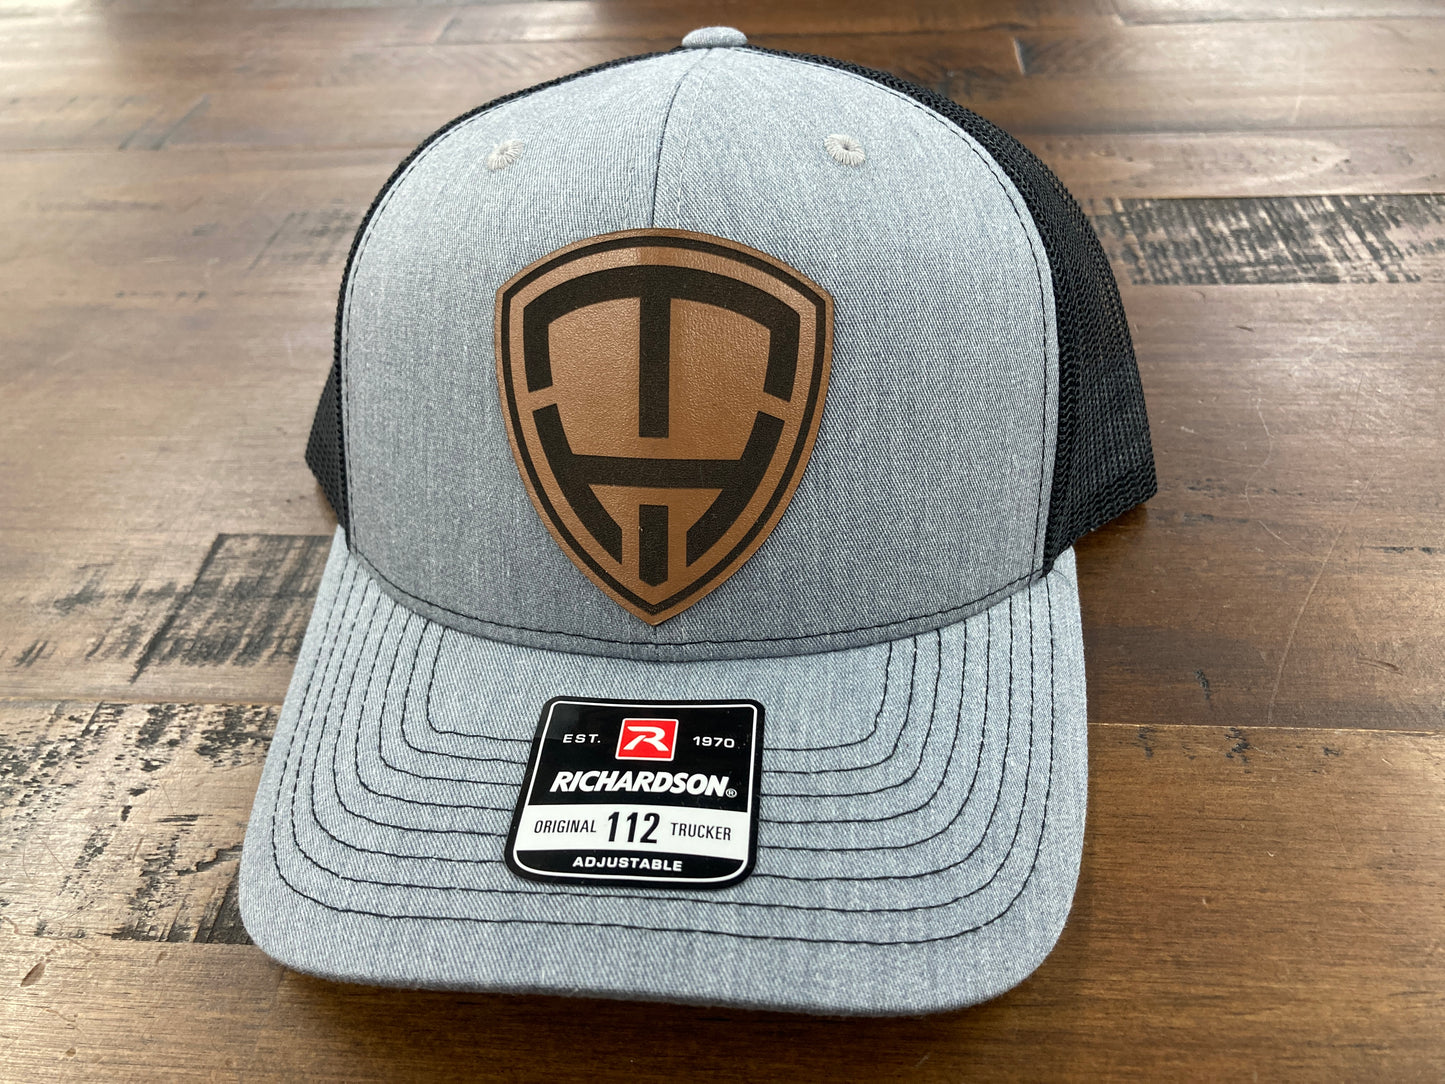 Thermal Hunting Patch Hat